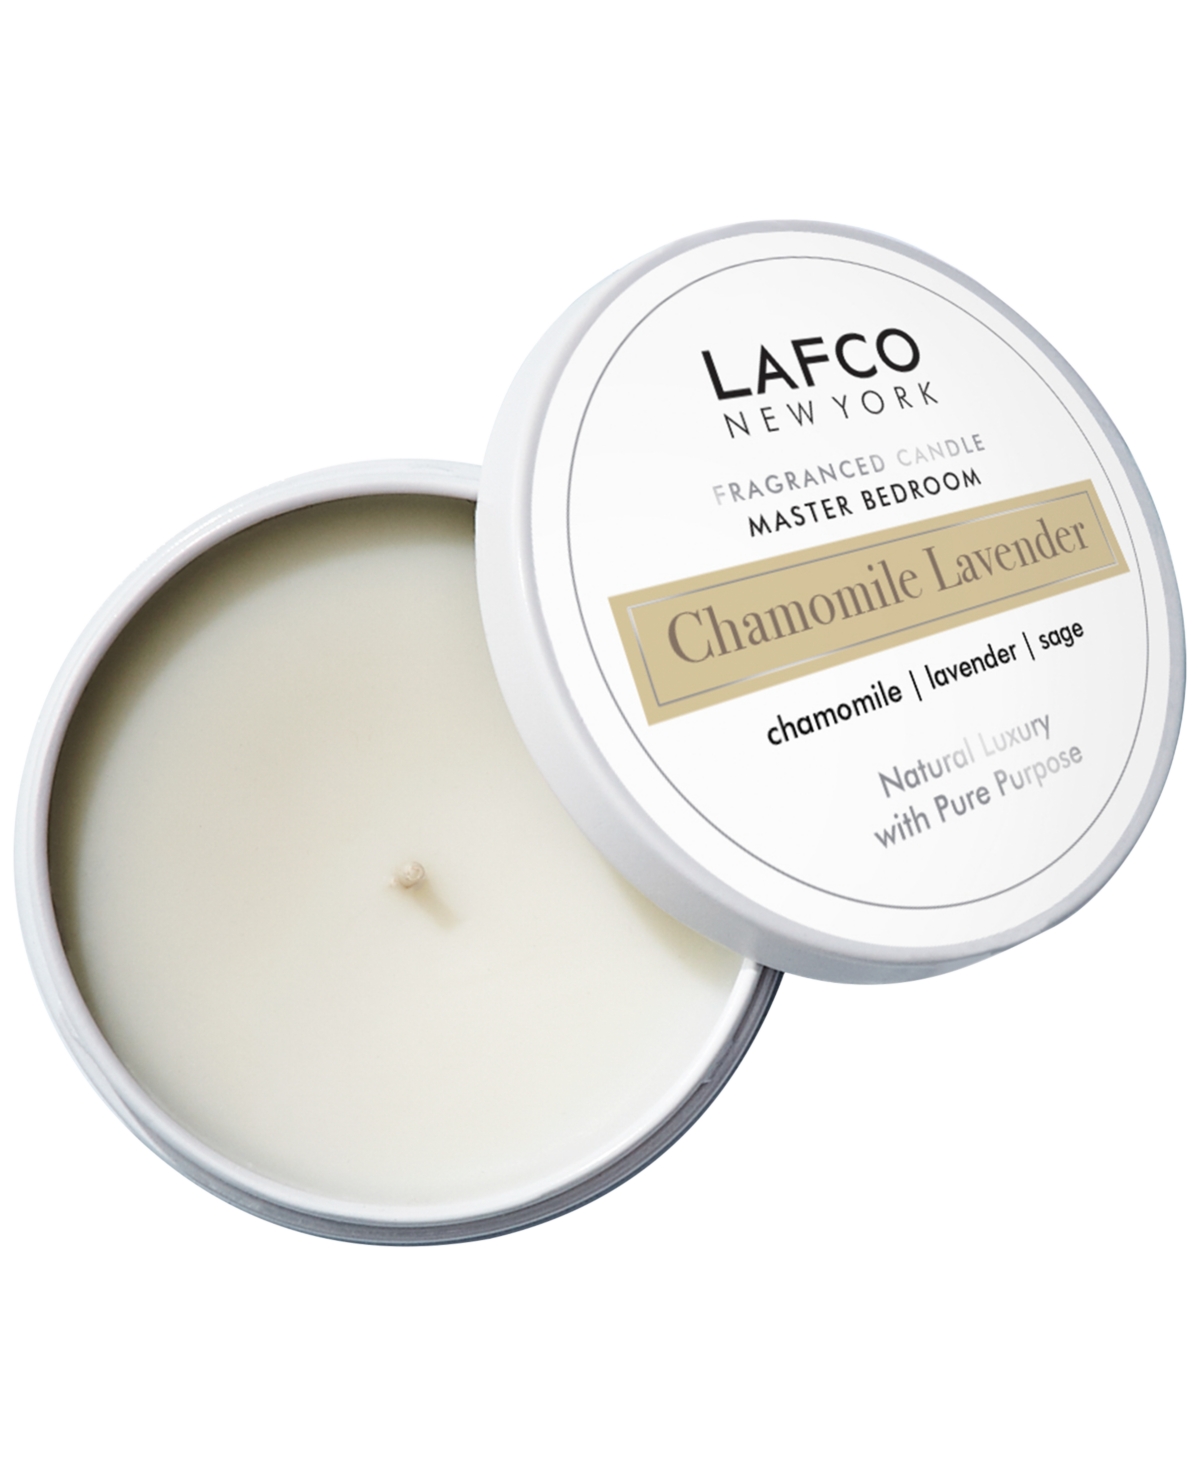 Lafco New York Chamomile Lavender Master Bedroom Travel Candle, 4-oz. In White